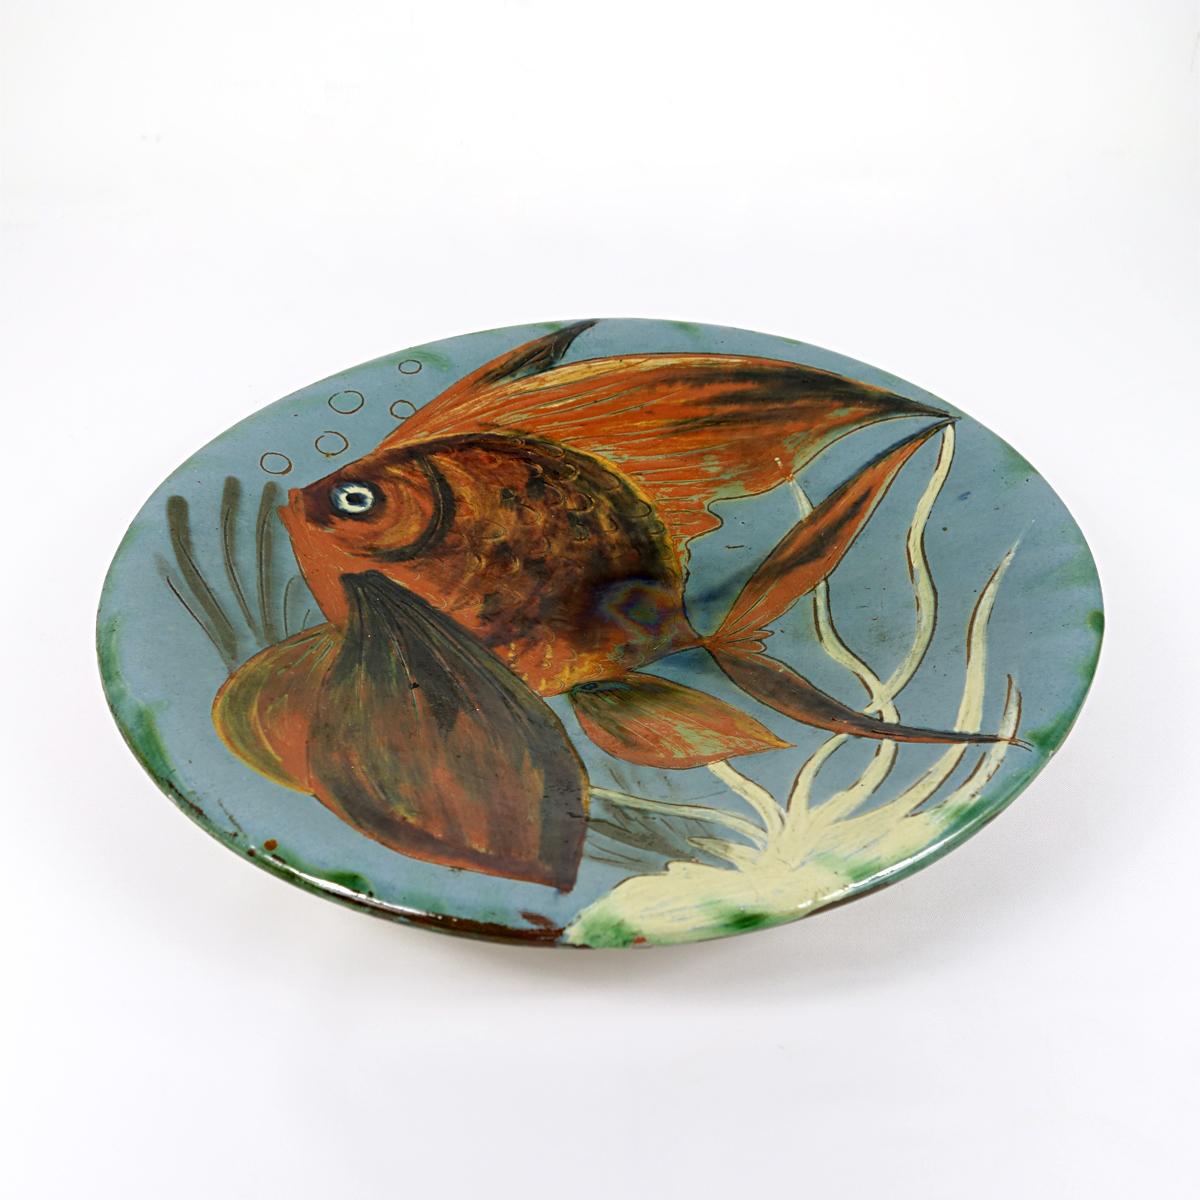 Very colorful and decorative wall plate with a stylized fish.
Designed and made by Puigdemont of Spain.
The plate has a diameter of 35.5 cm (13.8 inch).